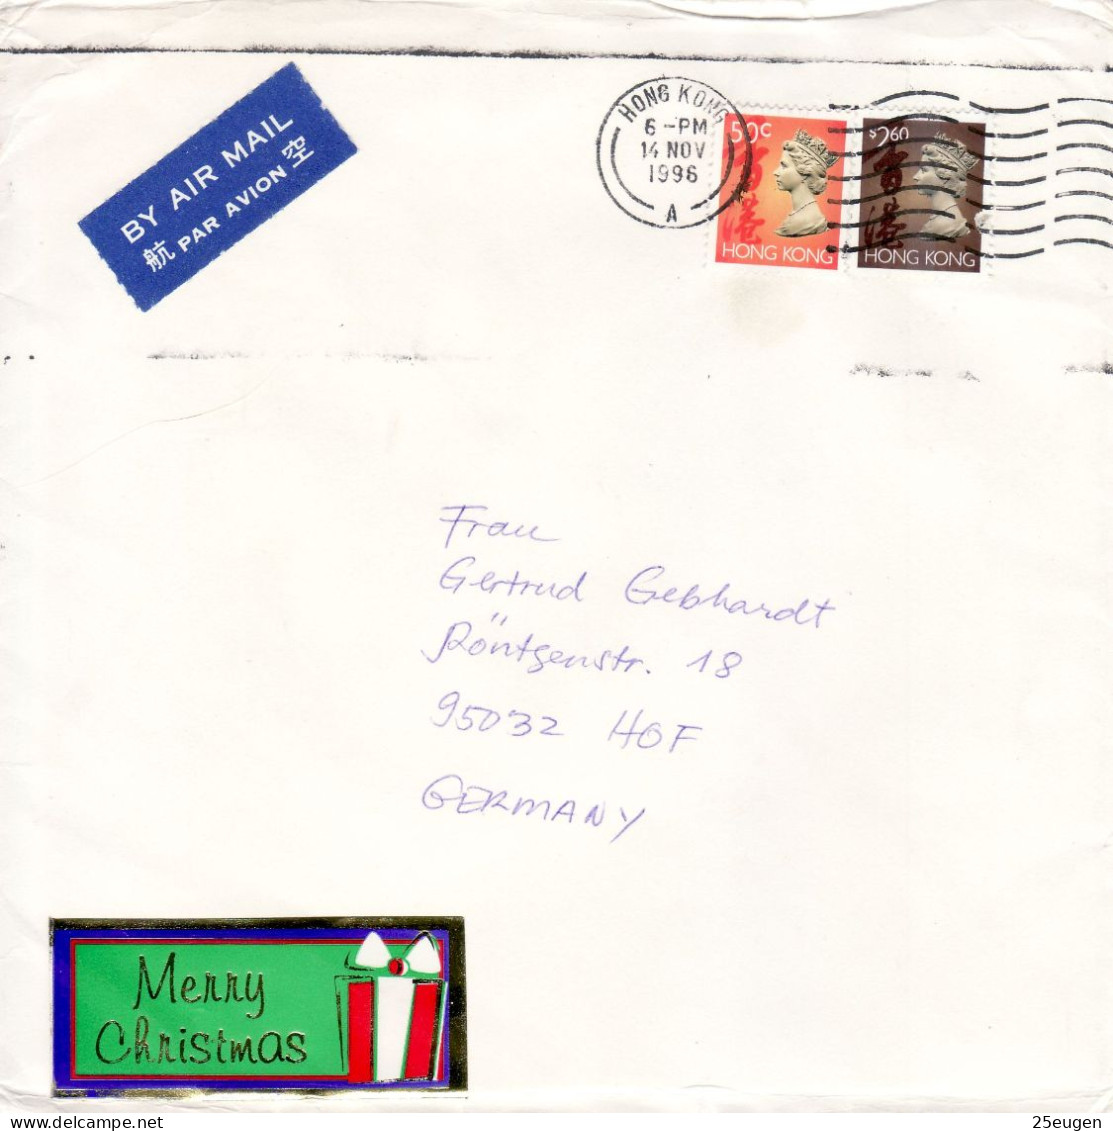 HONG KONG 1996  AIRMAIL  LETTER SENT  TO HOF - Lettres & Documents